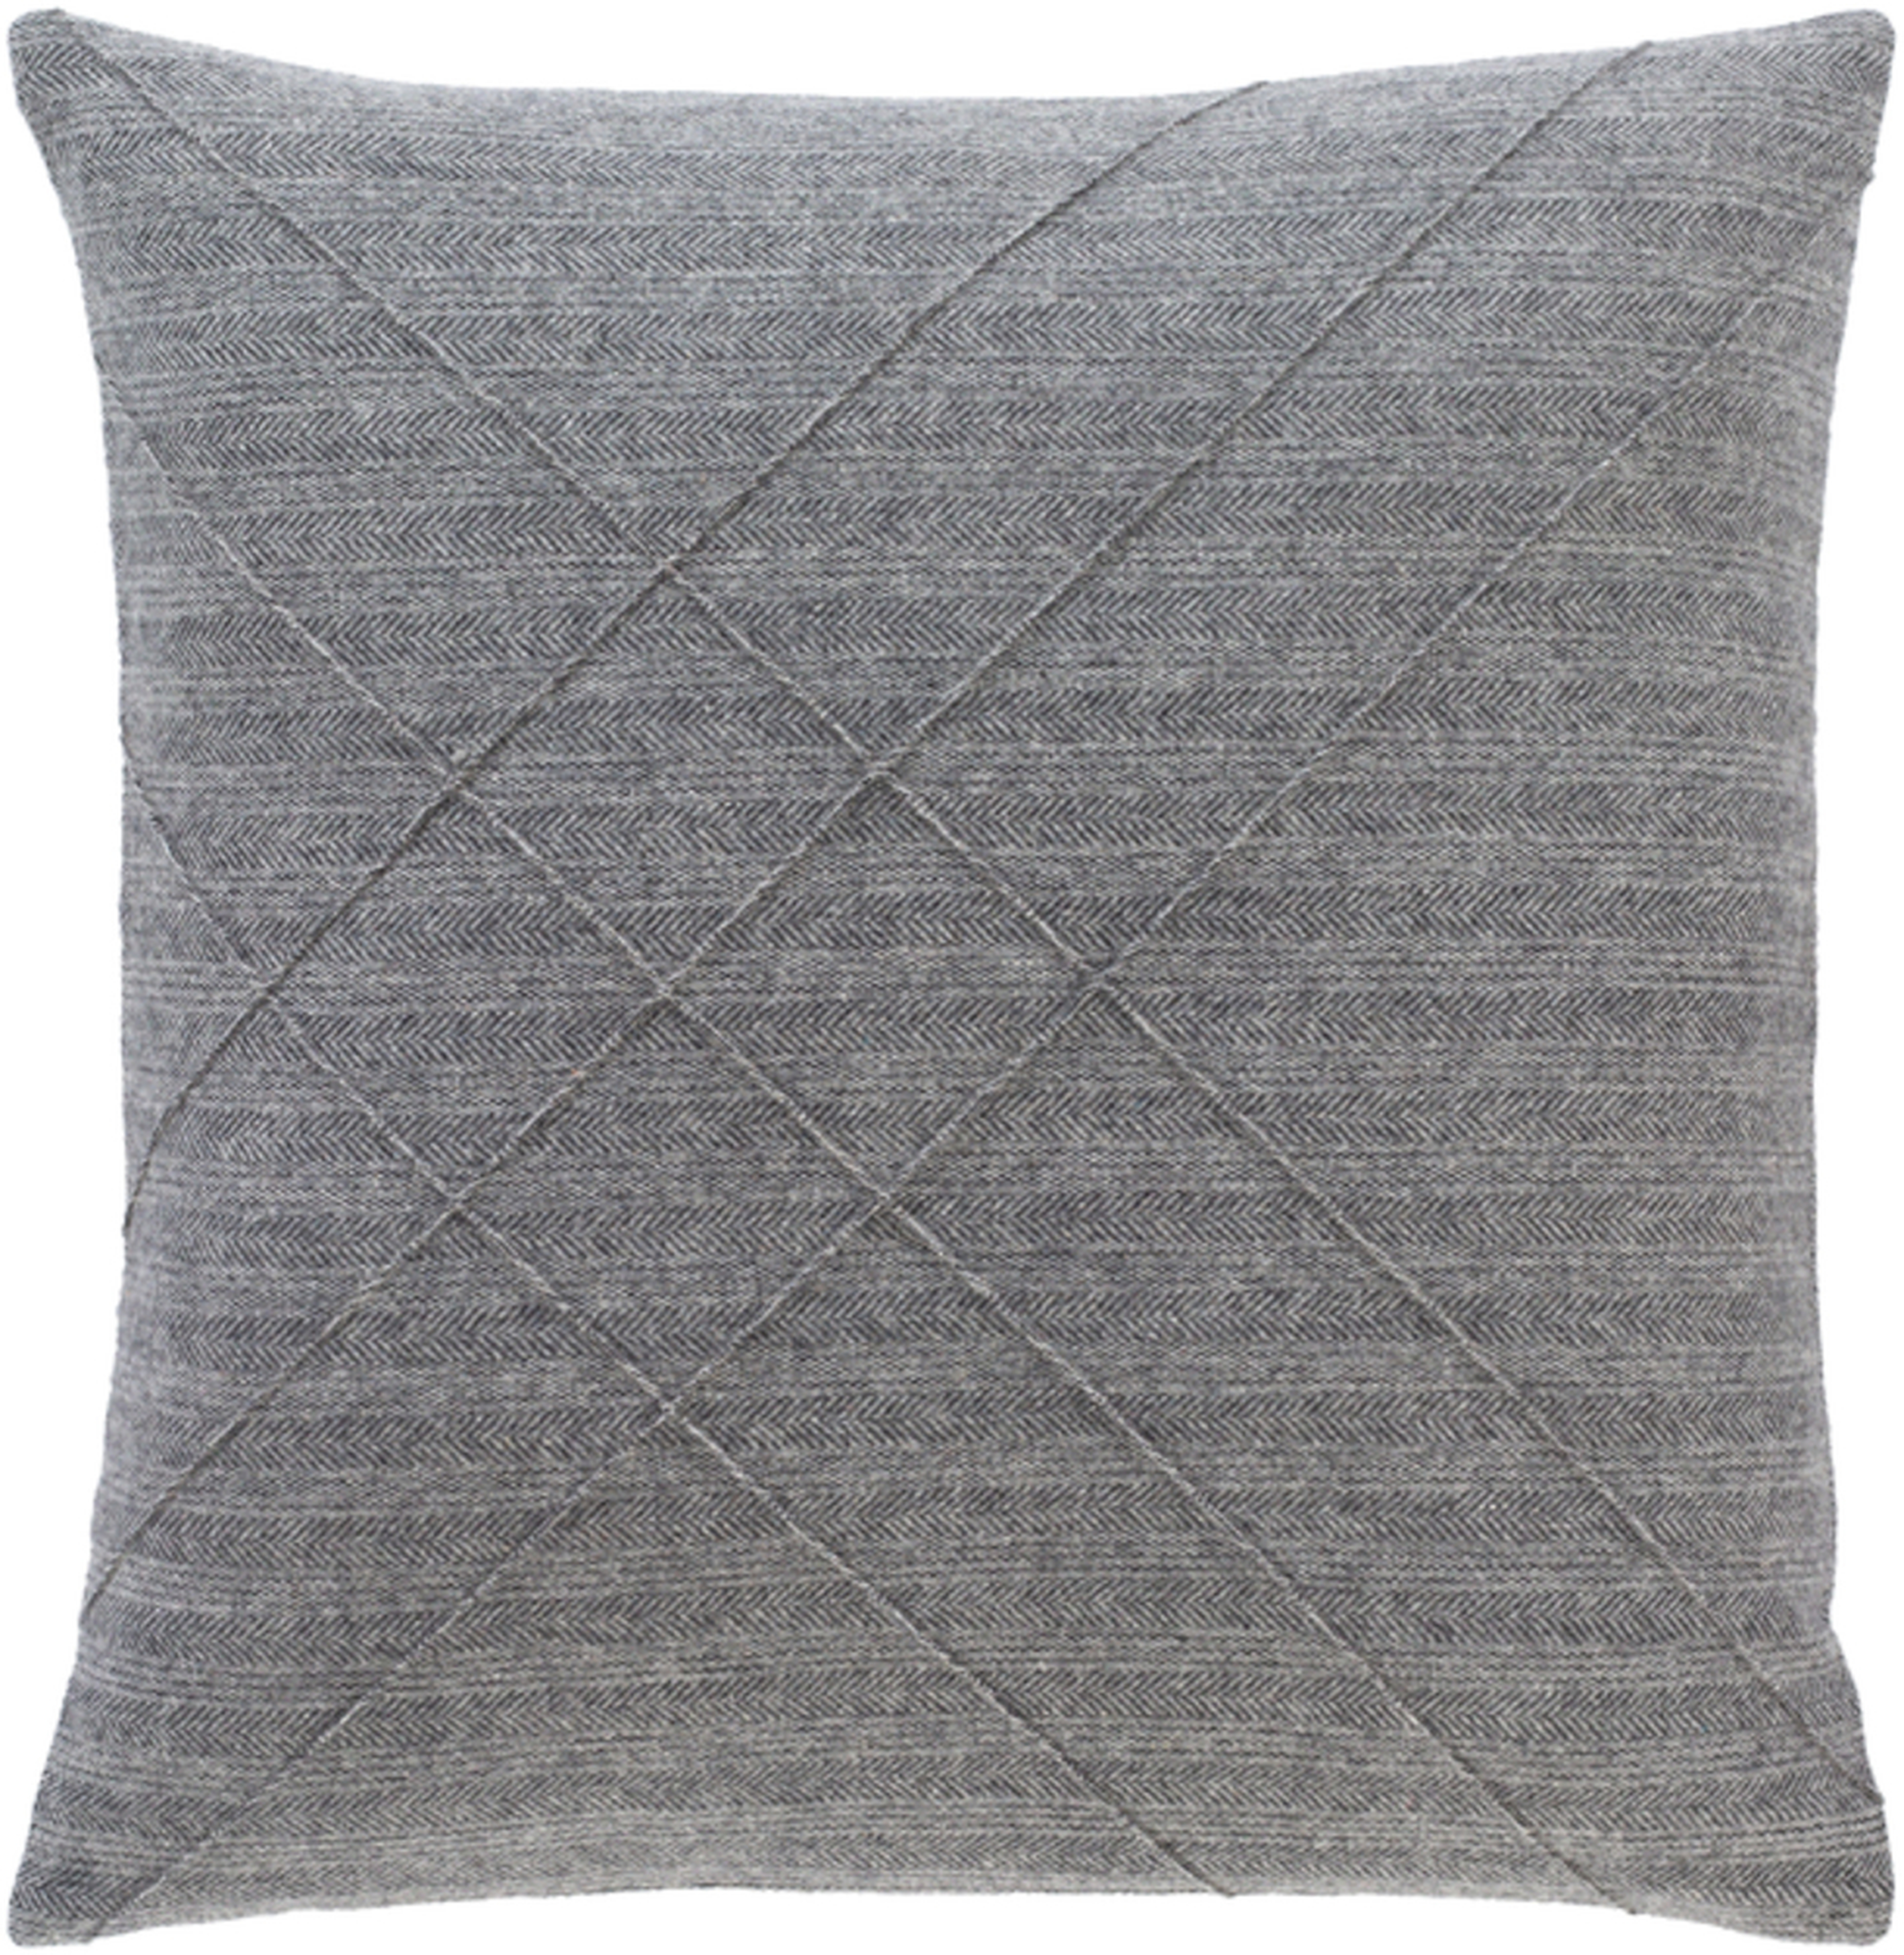 Welsley Pillow Cover, 18" x 18", Charcoal - DISCONTINUED - Cove Goods